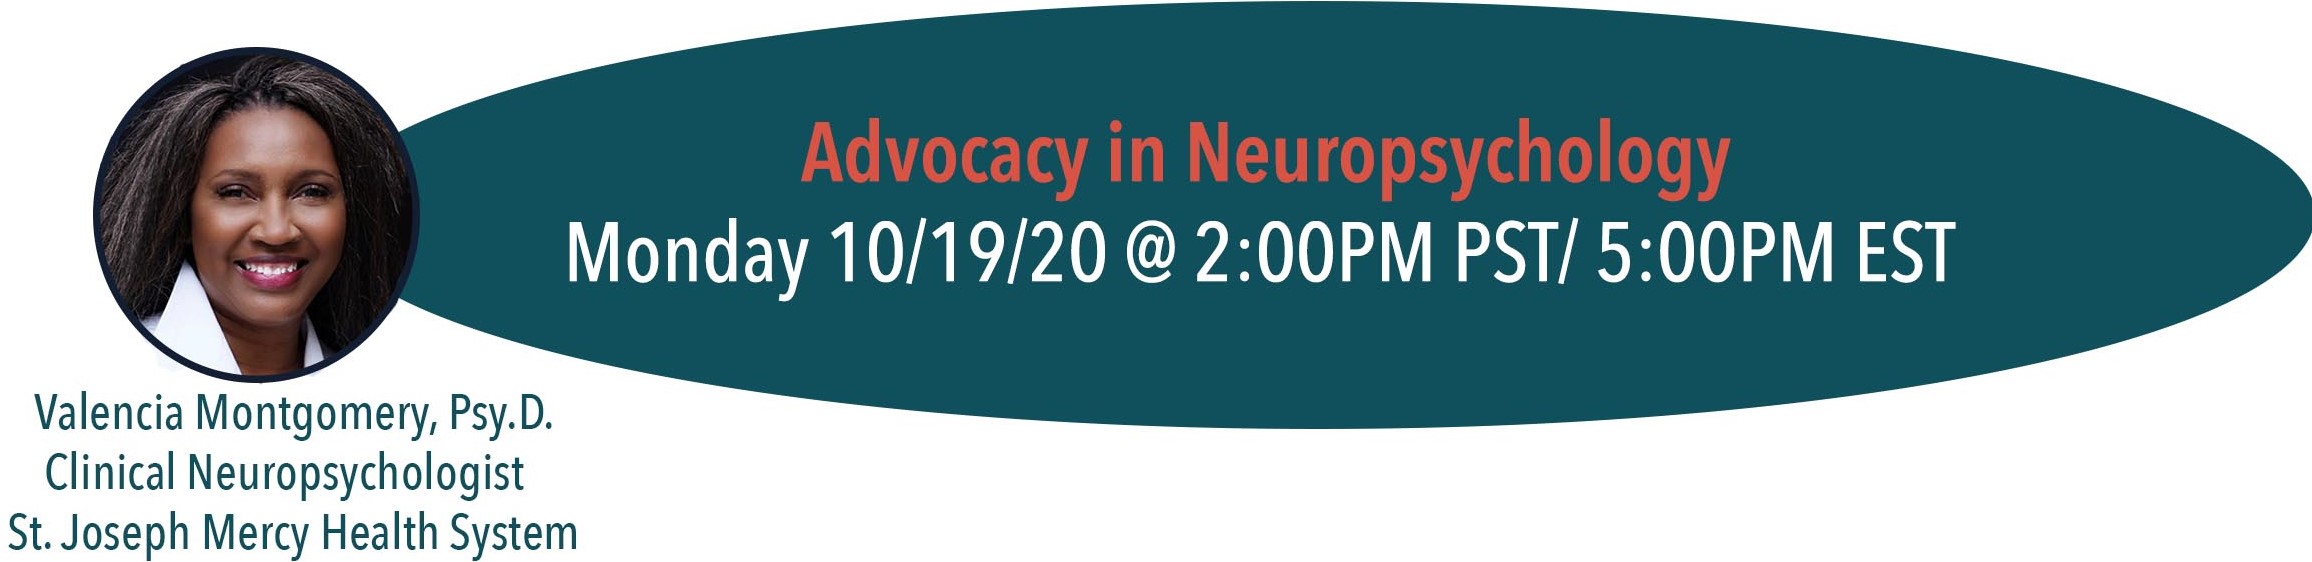 Advocacy in neuropsychology: Important considerations from the clinic to the profession by Dr. Valencia Montgomery